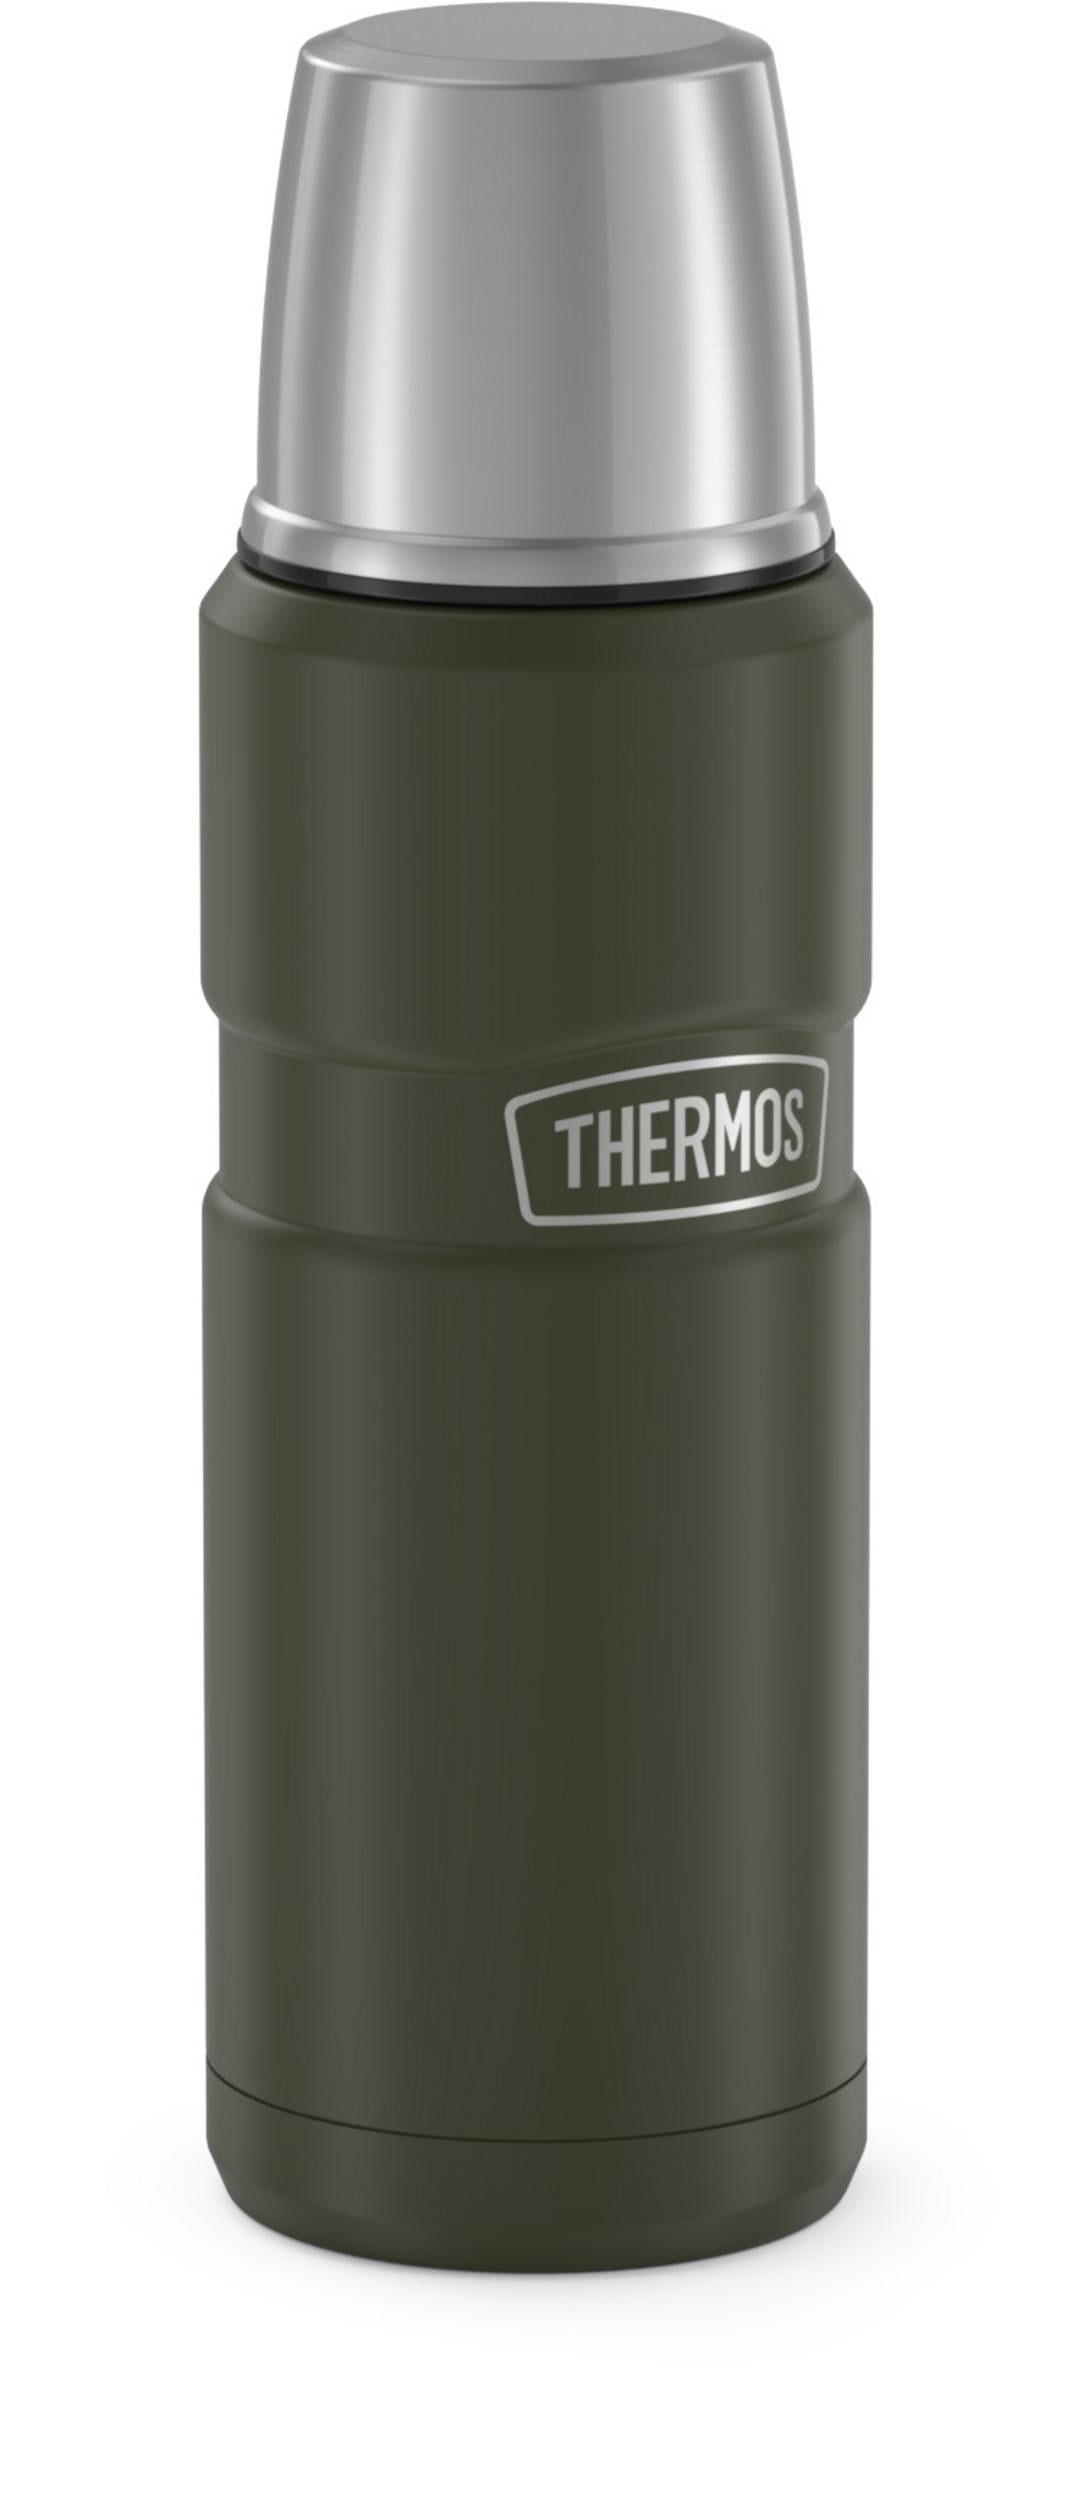 Thermos Stainless King Stainless Steel Compact Beverage Bottle 16 oz